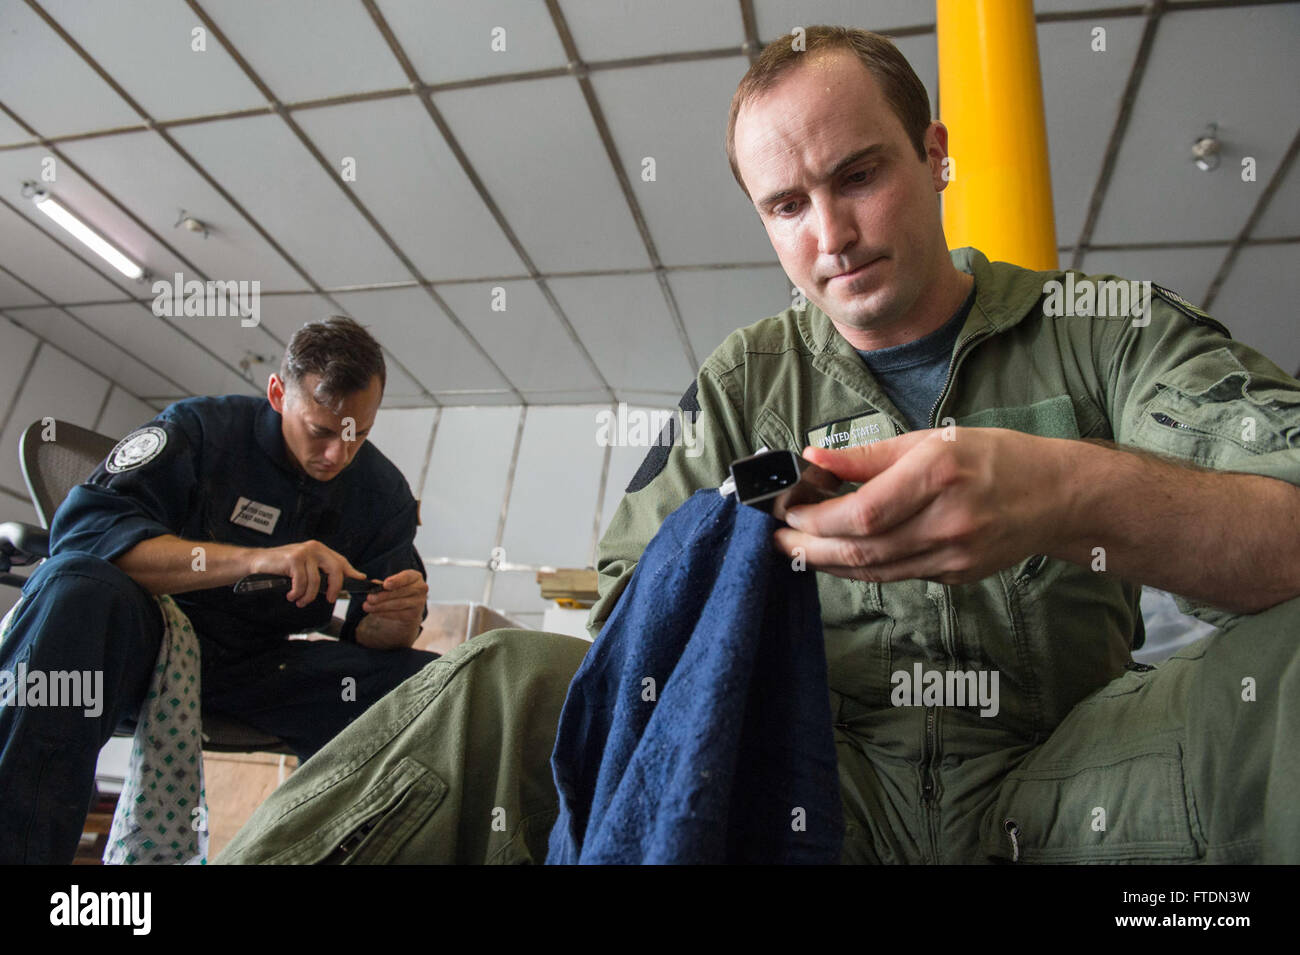 160306-N-QF605-023 GULF OF GUINEA (March 6, 2016) Machinery Technician 2nd Class Paul Avella, left, and Maritime Enforcement Specialist 1st Class Glenn Hyzak, U.S. Coast Guard Law Enforcement Detachment members, perform weapons maintenance aboard USNS Spearhead (T-EPF 1), March 6, 2016. The Military Sealift Command expeditionary fast transport vessel USNS Spearhead is on a scheduled deployment to the U.S. 6th Fleet area of operations to support the international collaborative capacity-building program Africa Partnership Station. (U.S. Navy photo by Mass Communication Specialist 1st Class Amand Stock Photo